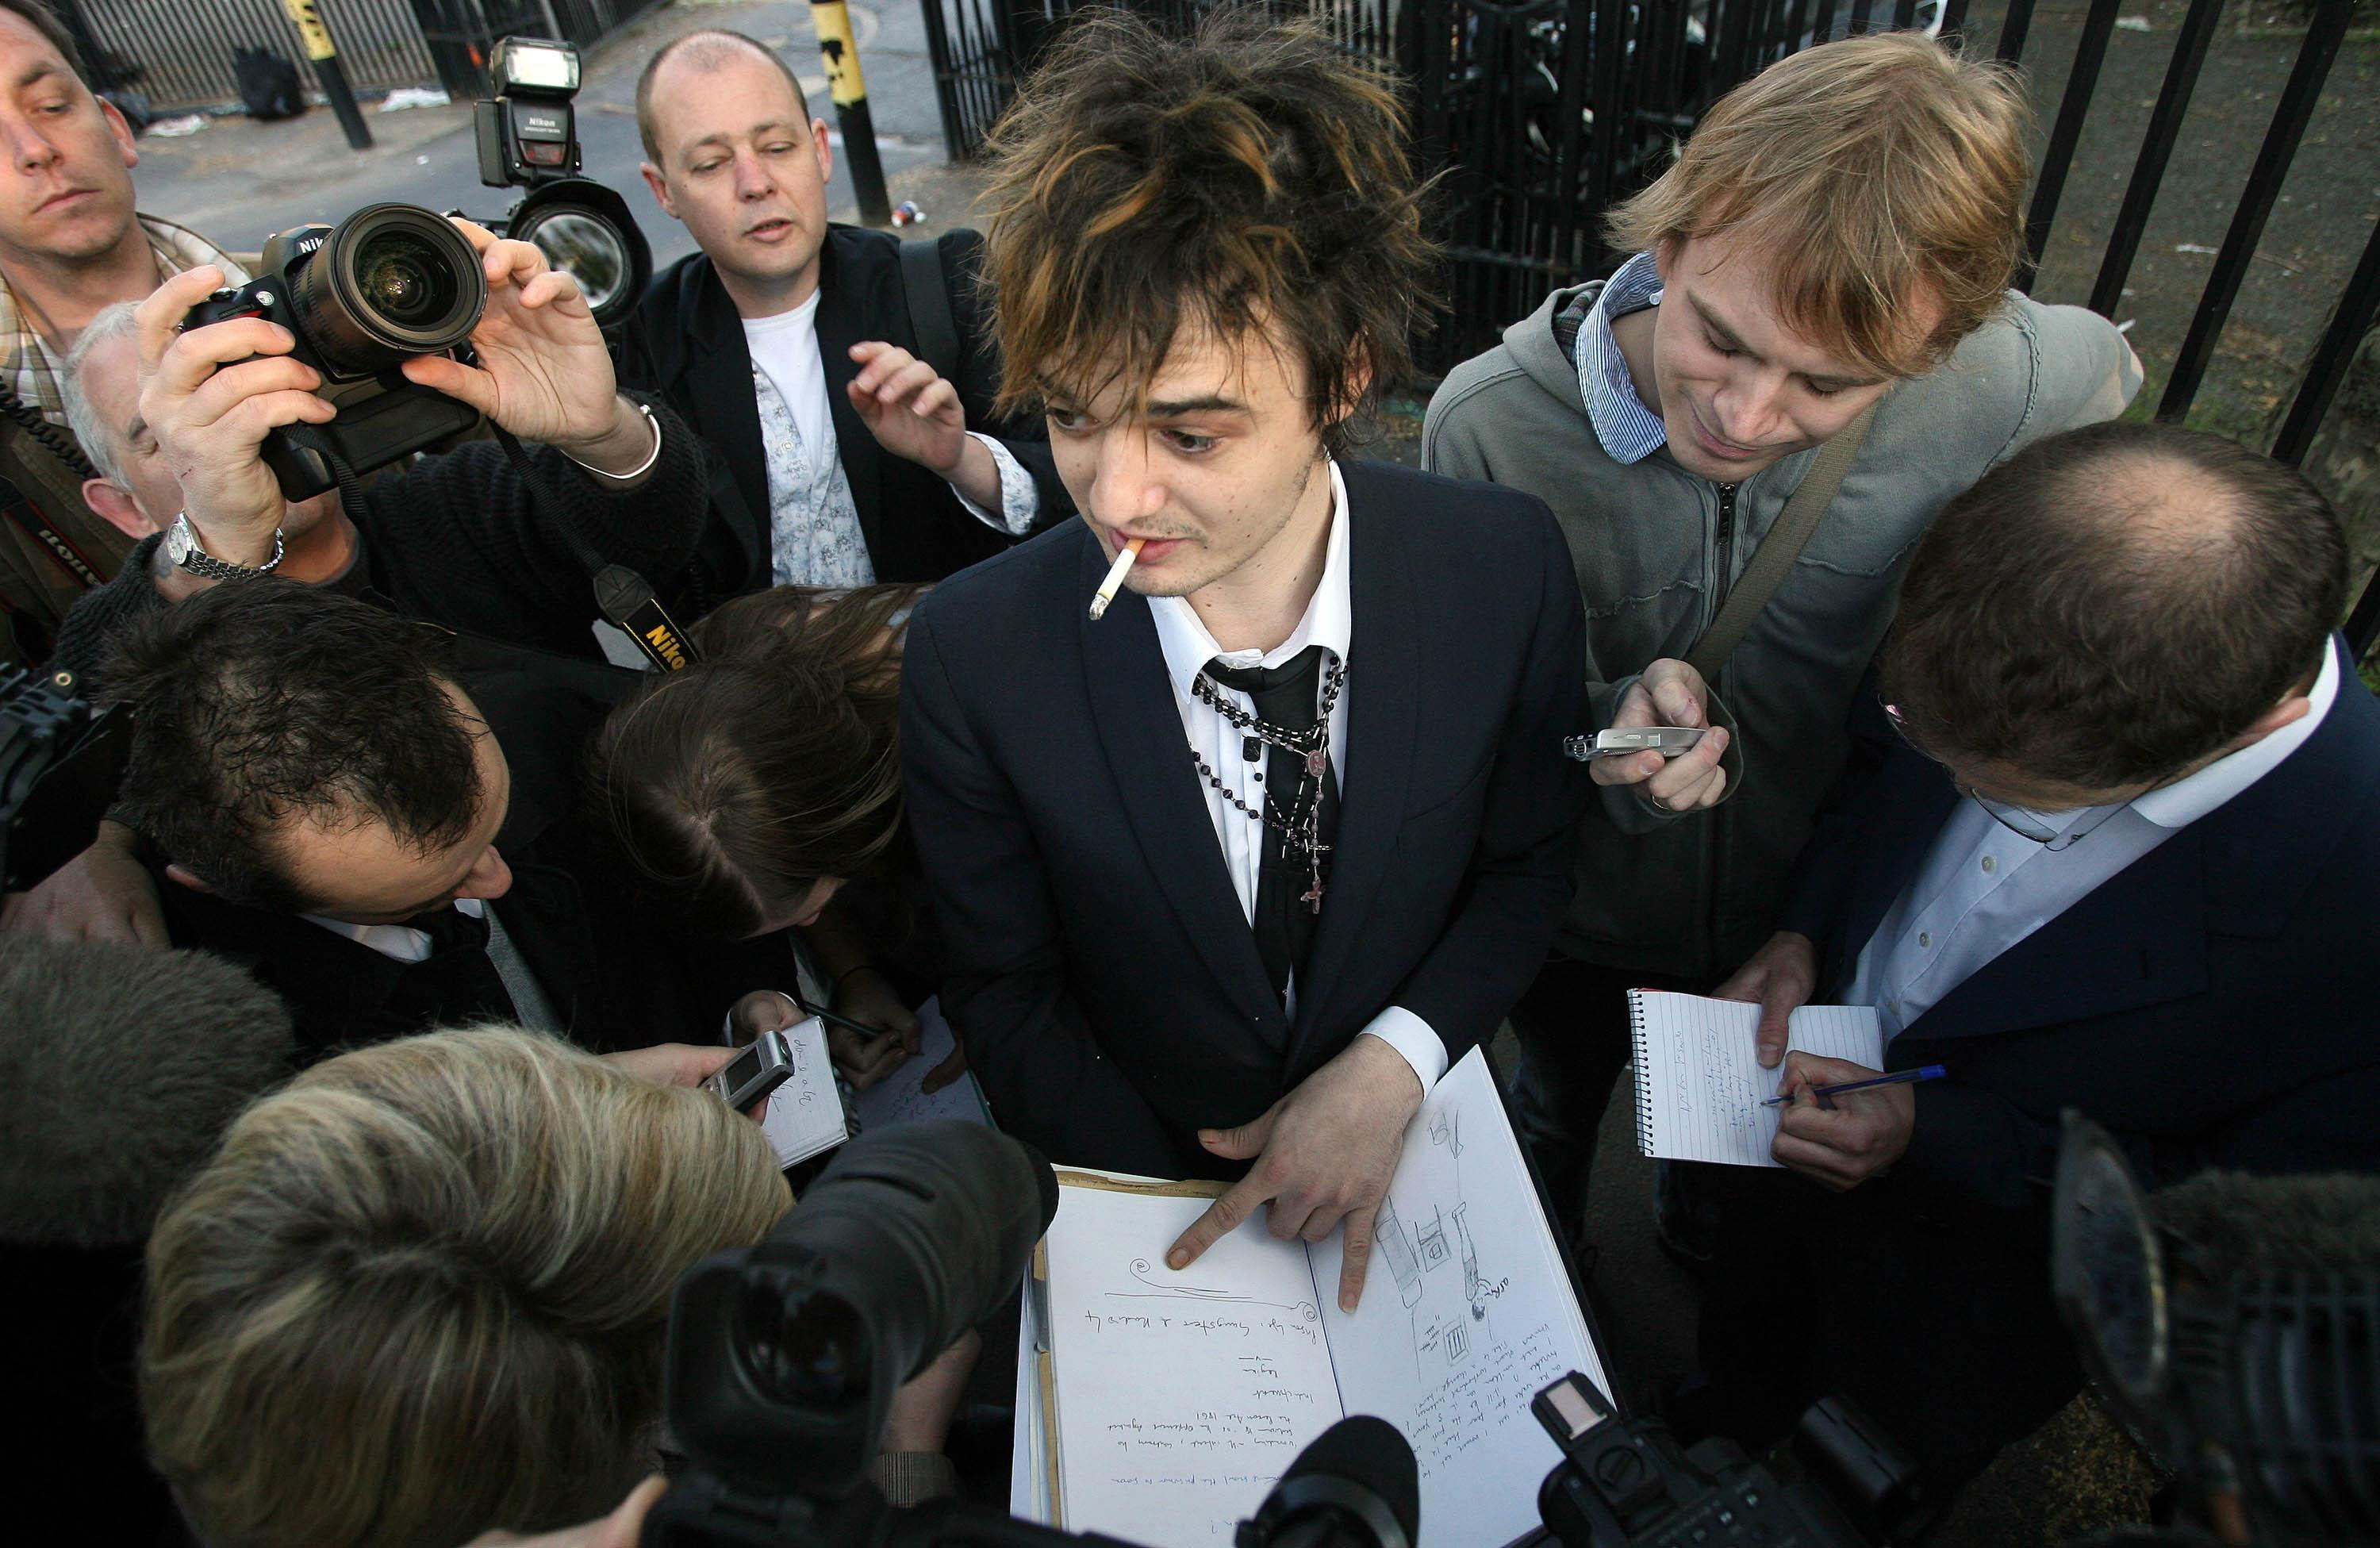 Pete Doherty outside Wormwood Scrubs upon his release from prison in 2008 (Lewis Whyld/PA)